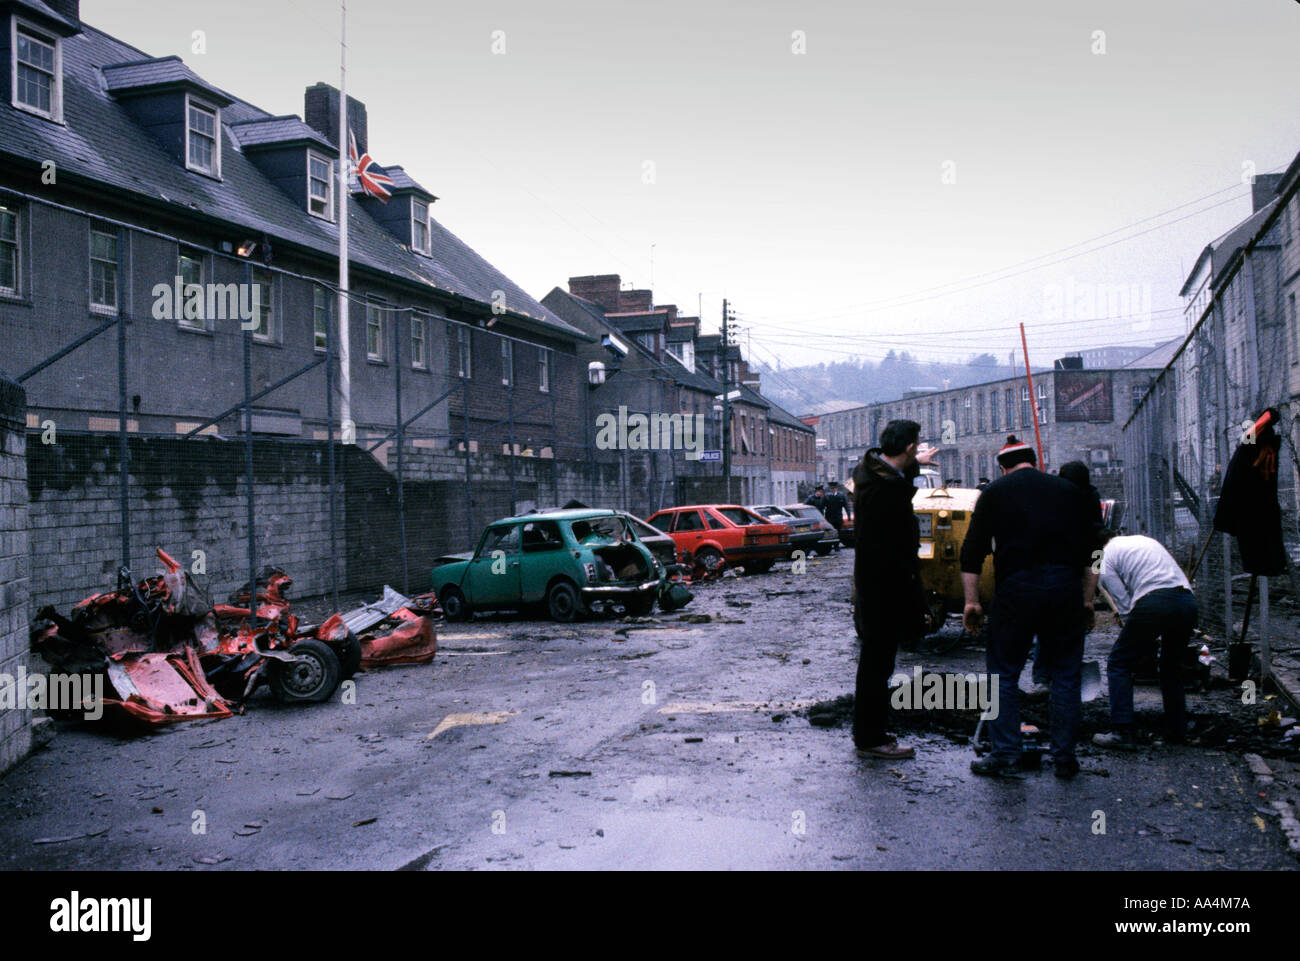 NEWRY BOMBING NORTHERN IRELAND 28 FEB 1985. 9 RUC POLICE OFFICERS DIED WHEN THE IRA MORTAR BOMBED THEIR POLICE STATION IN NEWRY Stock Photo